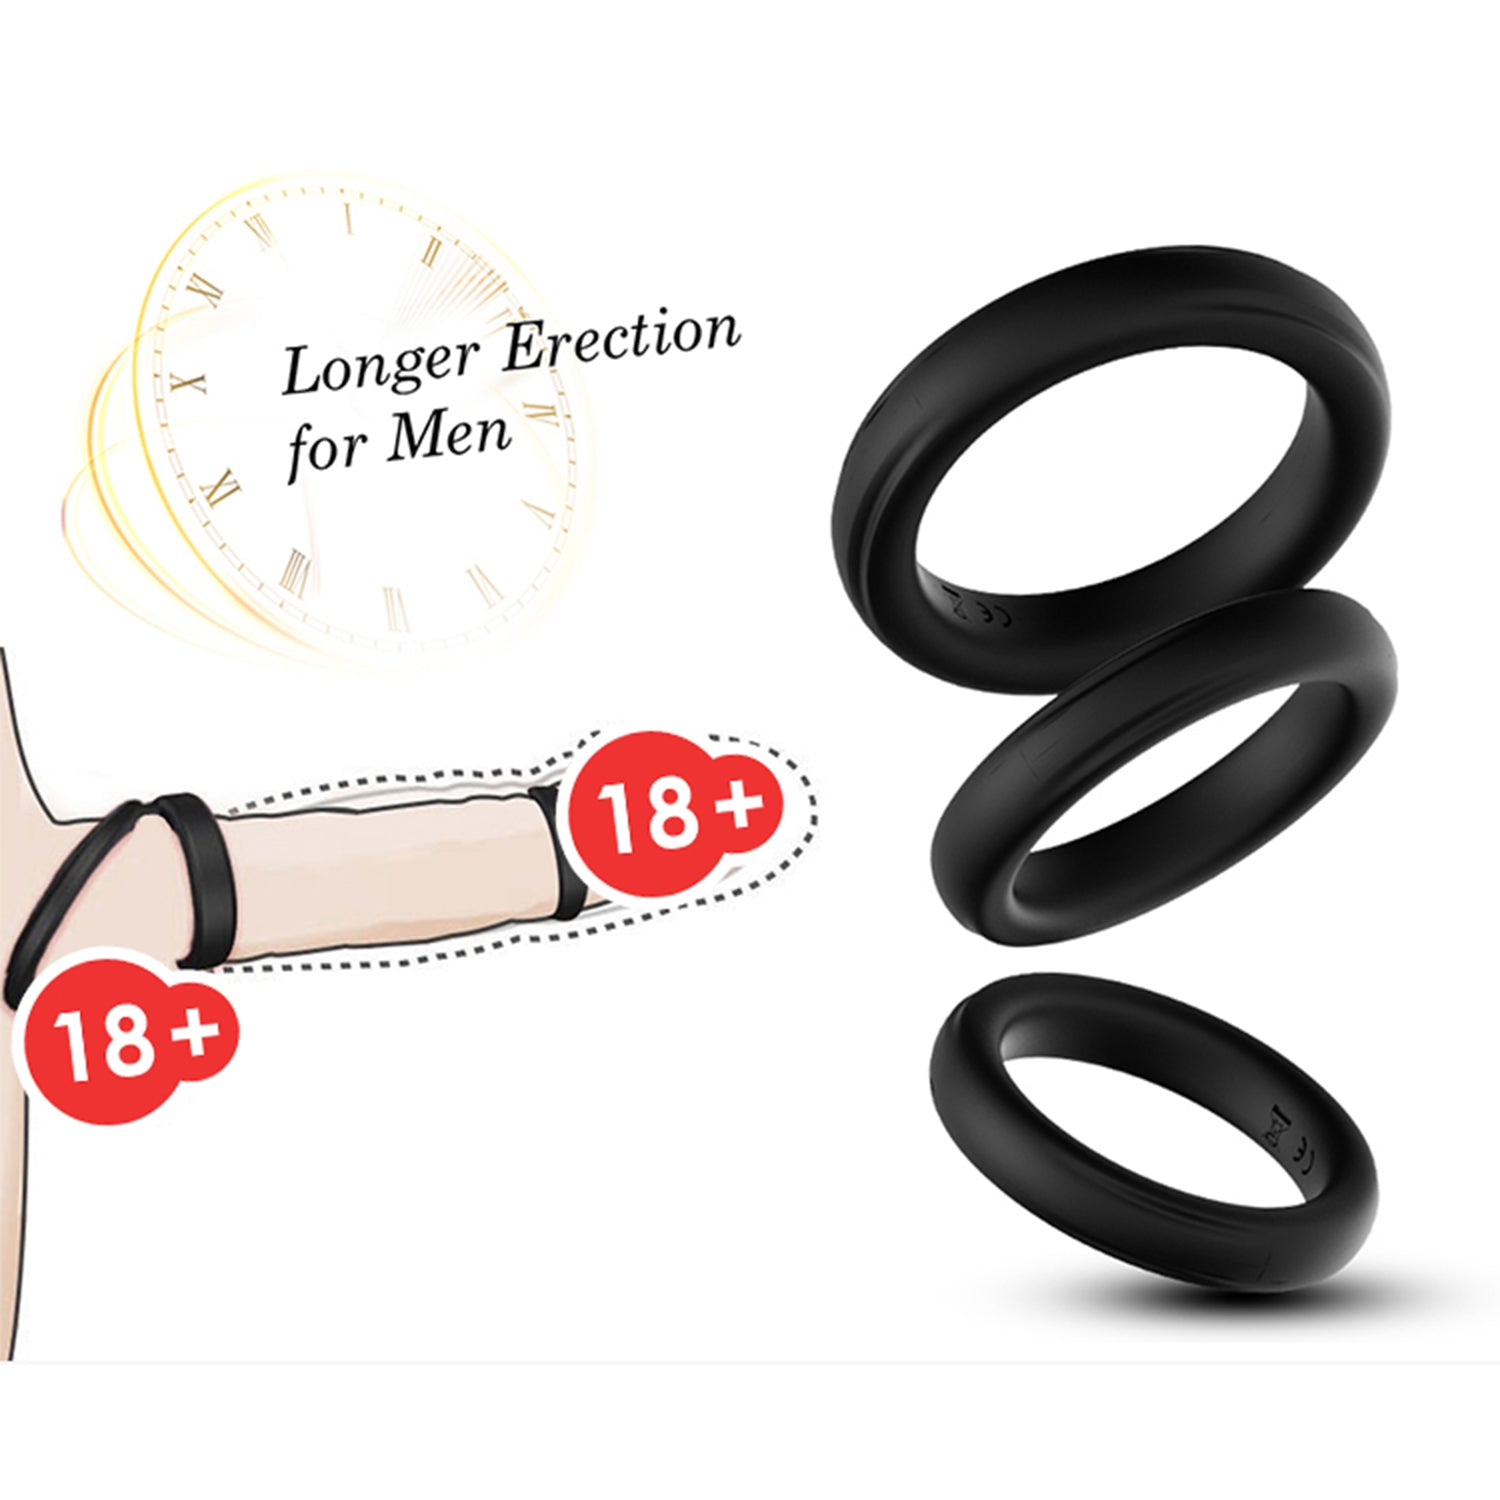 3 Piece Size Differentiated Male Enhancement Cock Ring Set